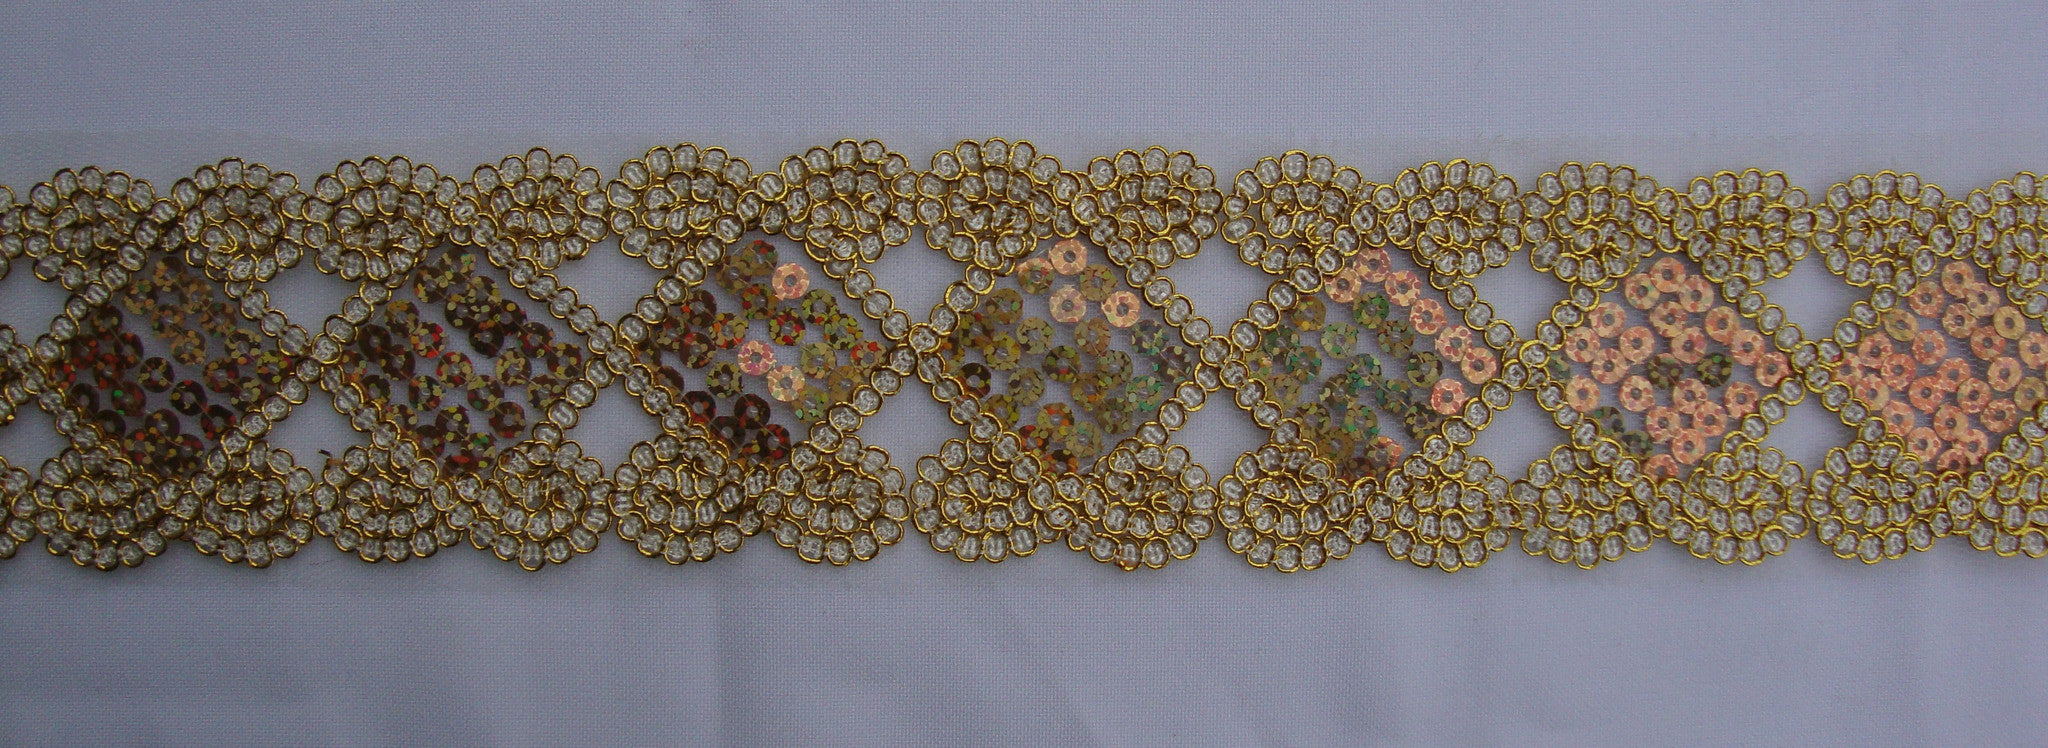 Gold Lace Trimming ( Sold as a 2 yard piece)